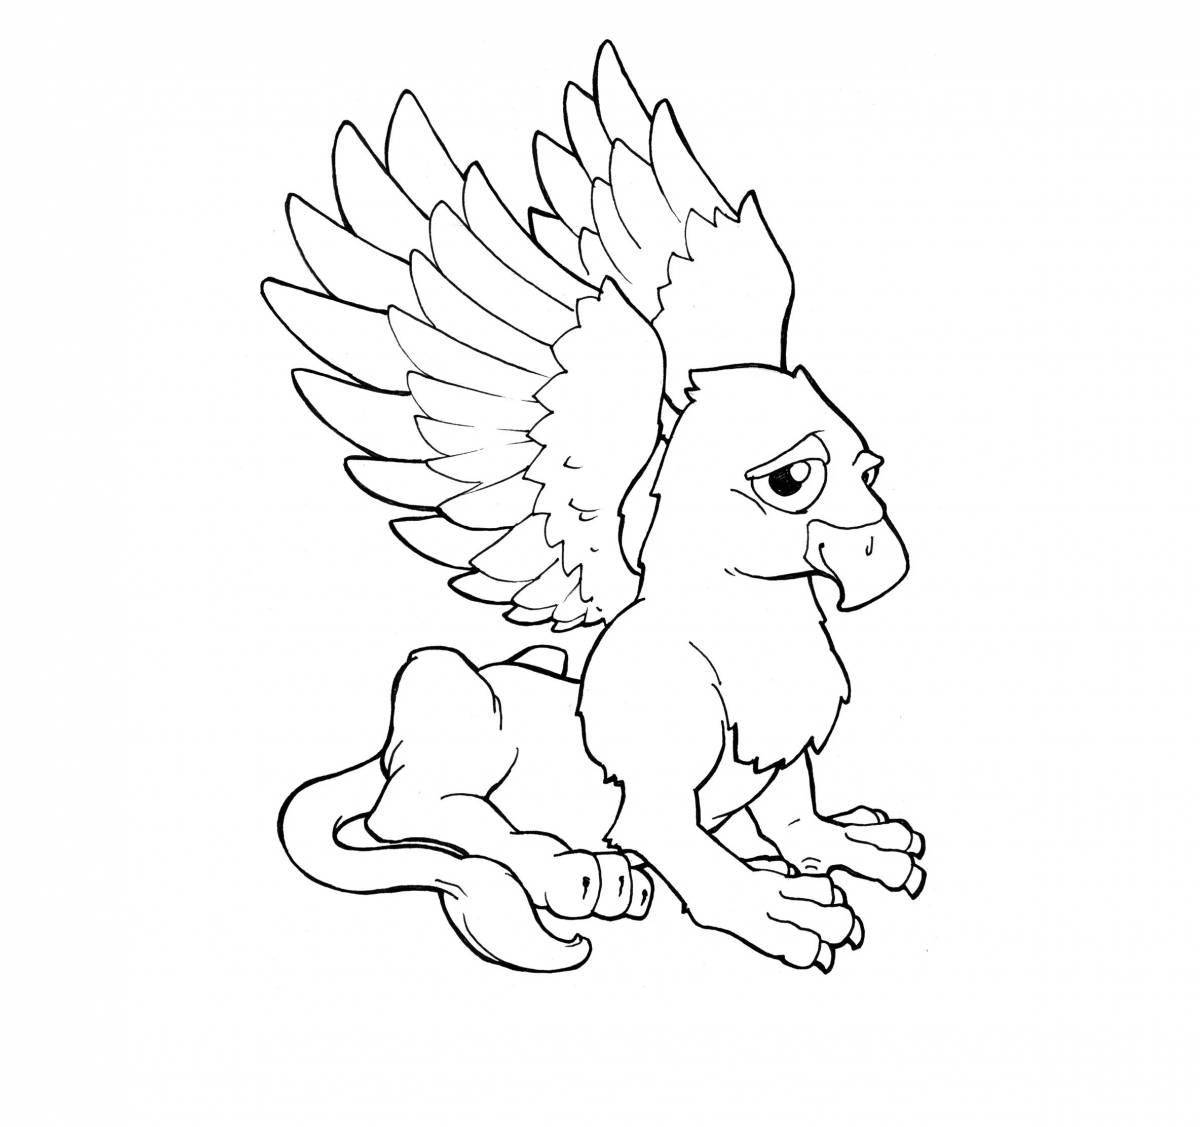 Exalted fairy beast coloring page